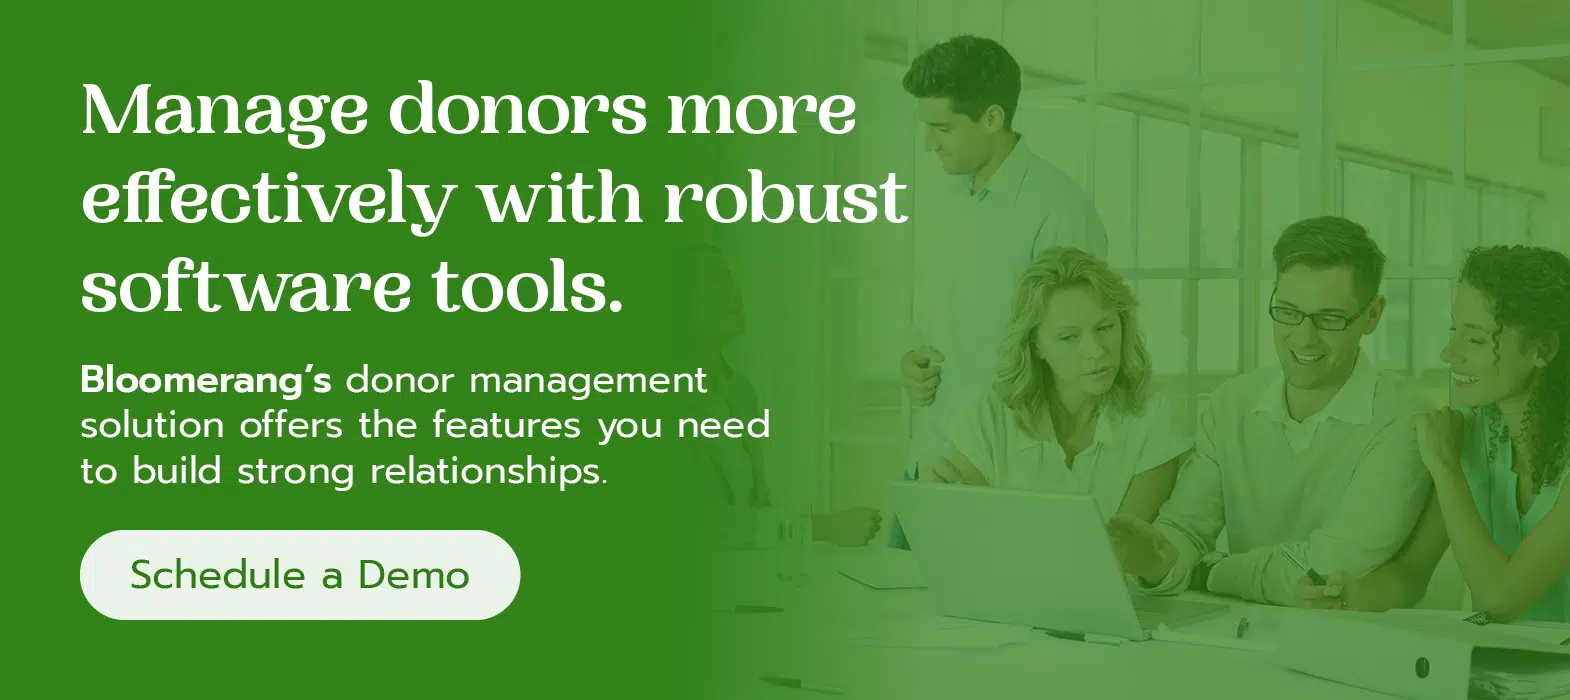 Manage donors more effectively with robust software tools. Bloomerang’s donor management solution offers the features you need to build strong relationships. Schedule a demo here.